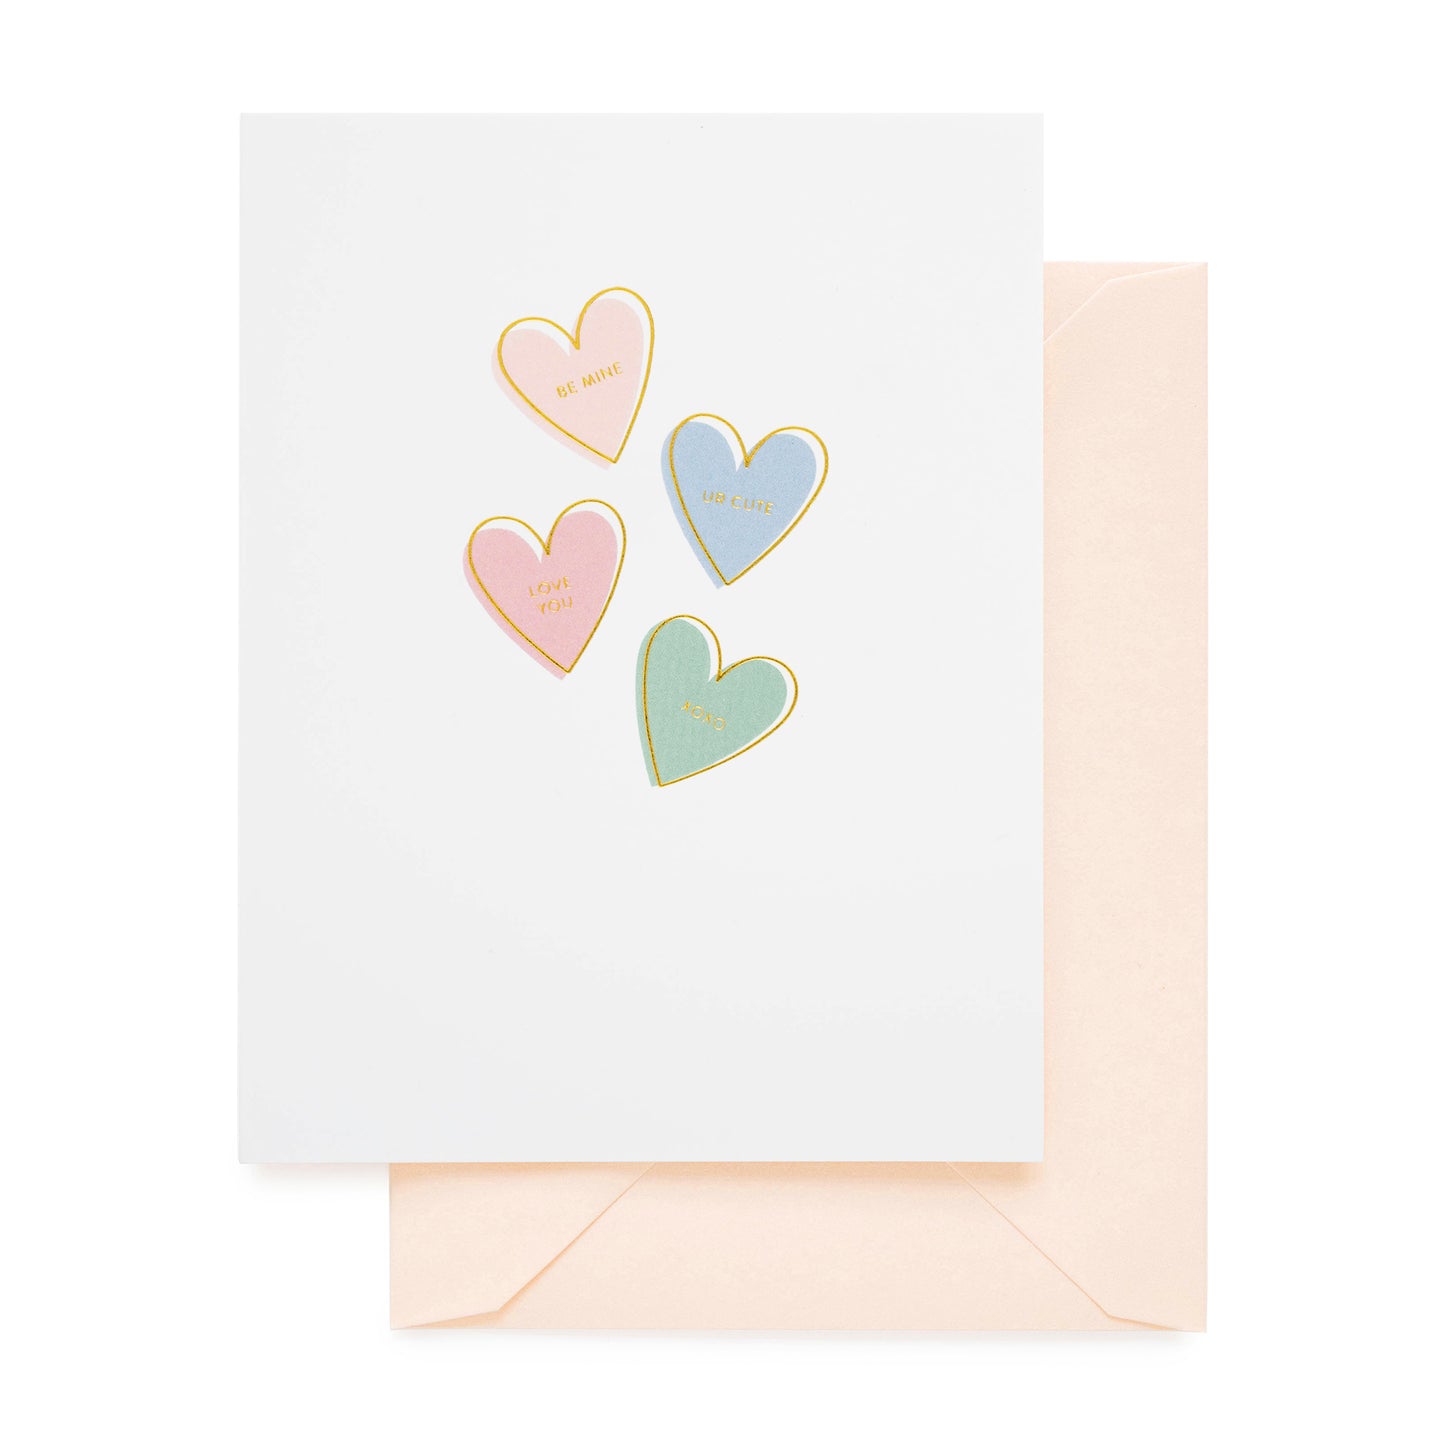 Colorful Candy conversation hearts printed on white card with pink envelope